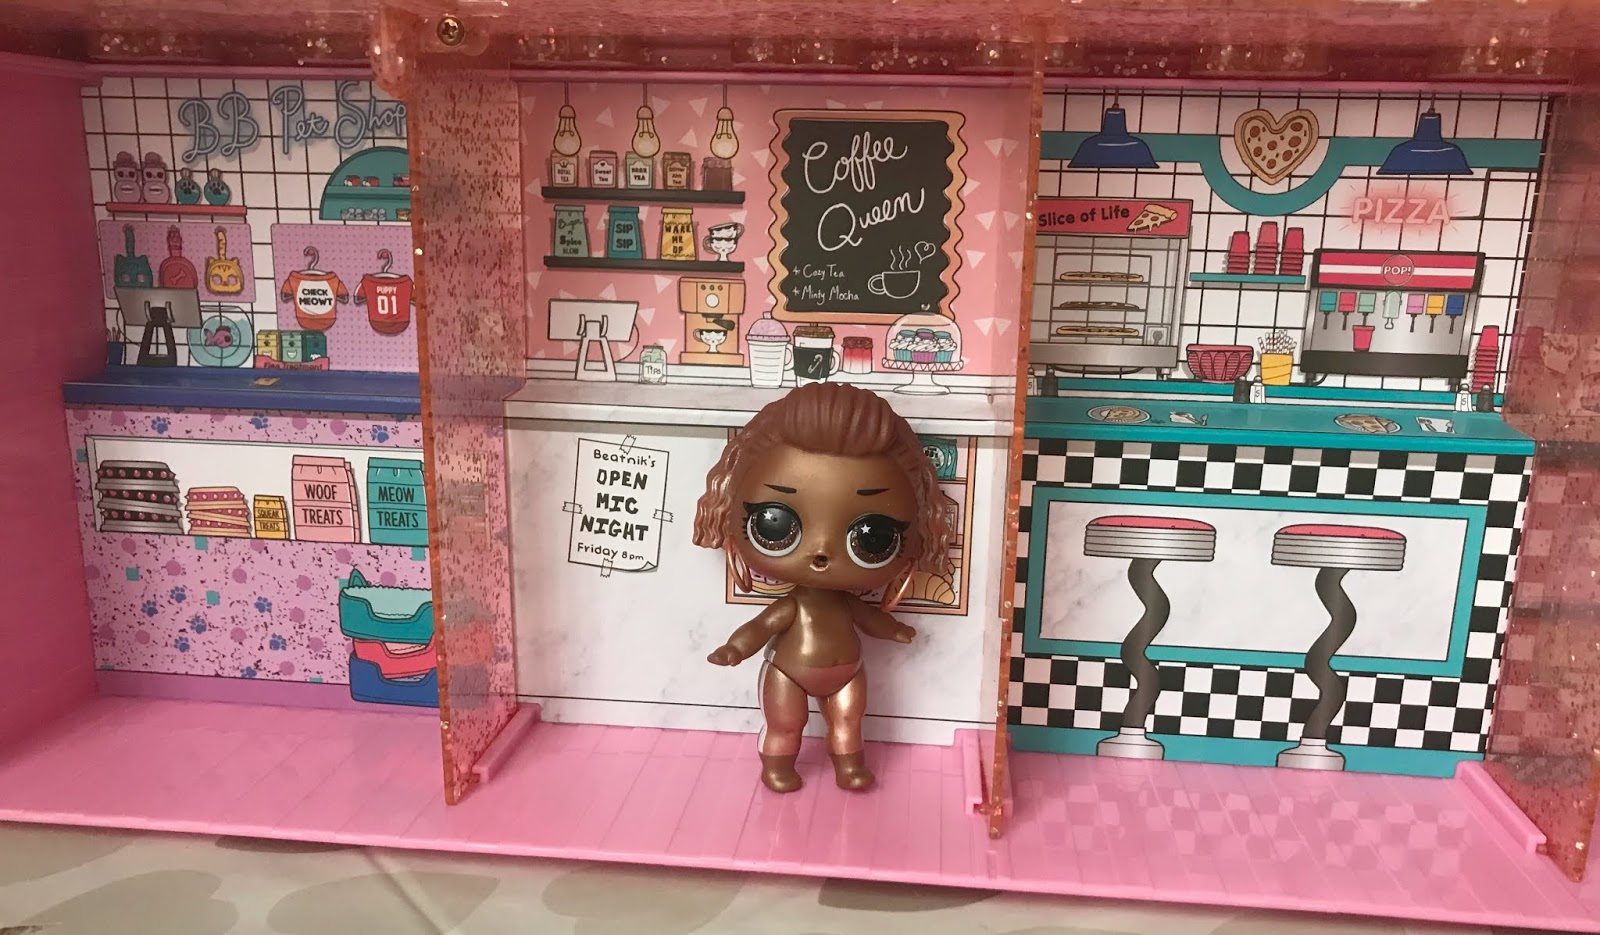 L.O.L. Surprise Pop-Up Store Playset Review | Newcastle Family Life